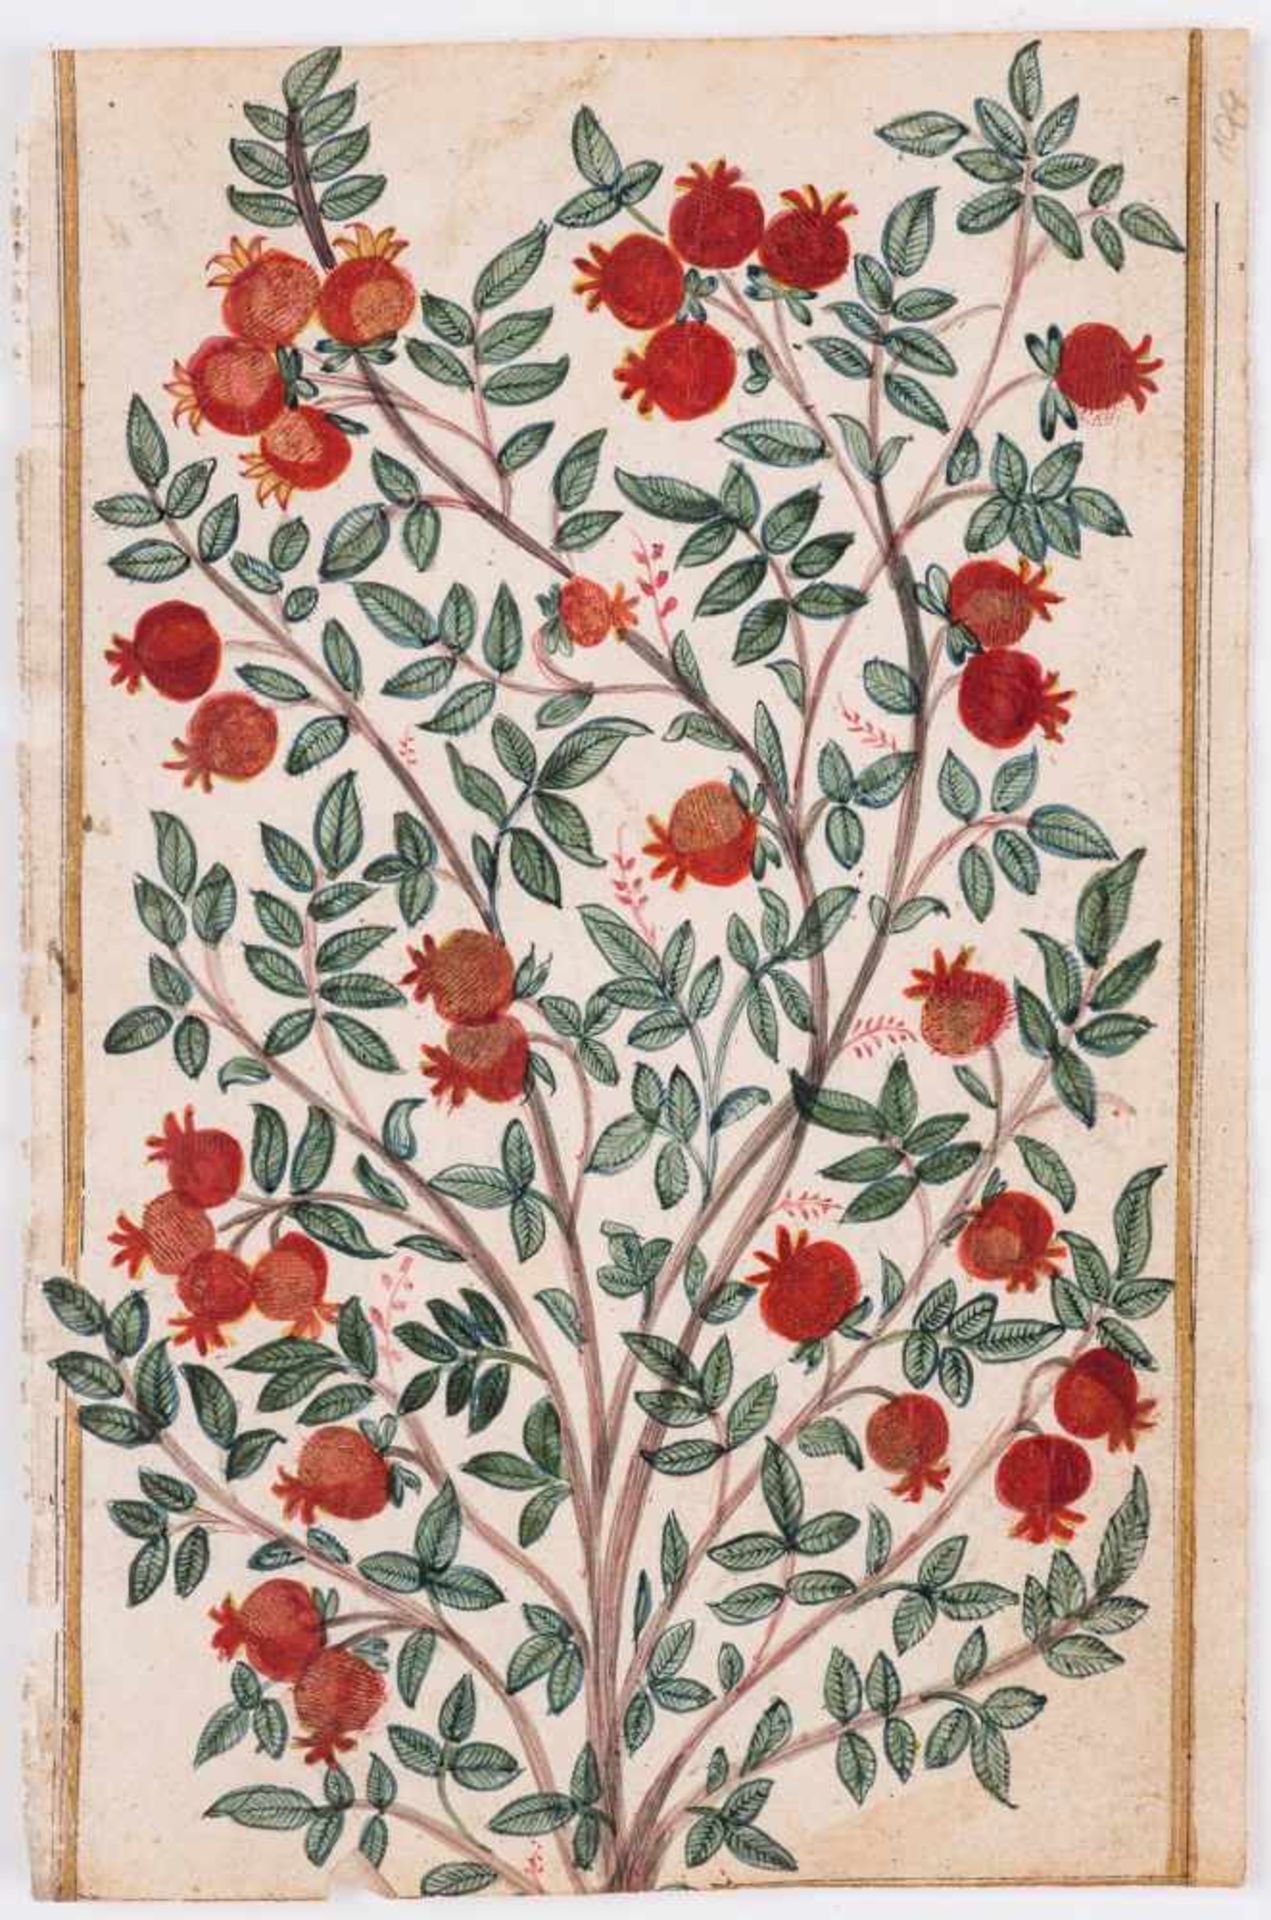 A GROUP OF ELEVEN FLOWER AND TREE MINIATURE PAINTINGS – INDIA 19th CENTURYWatercolors and gold paint - Bild 6 aus 12